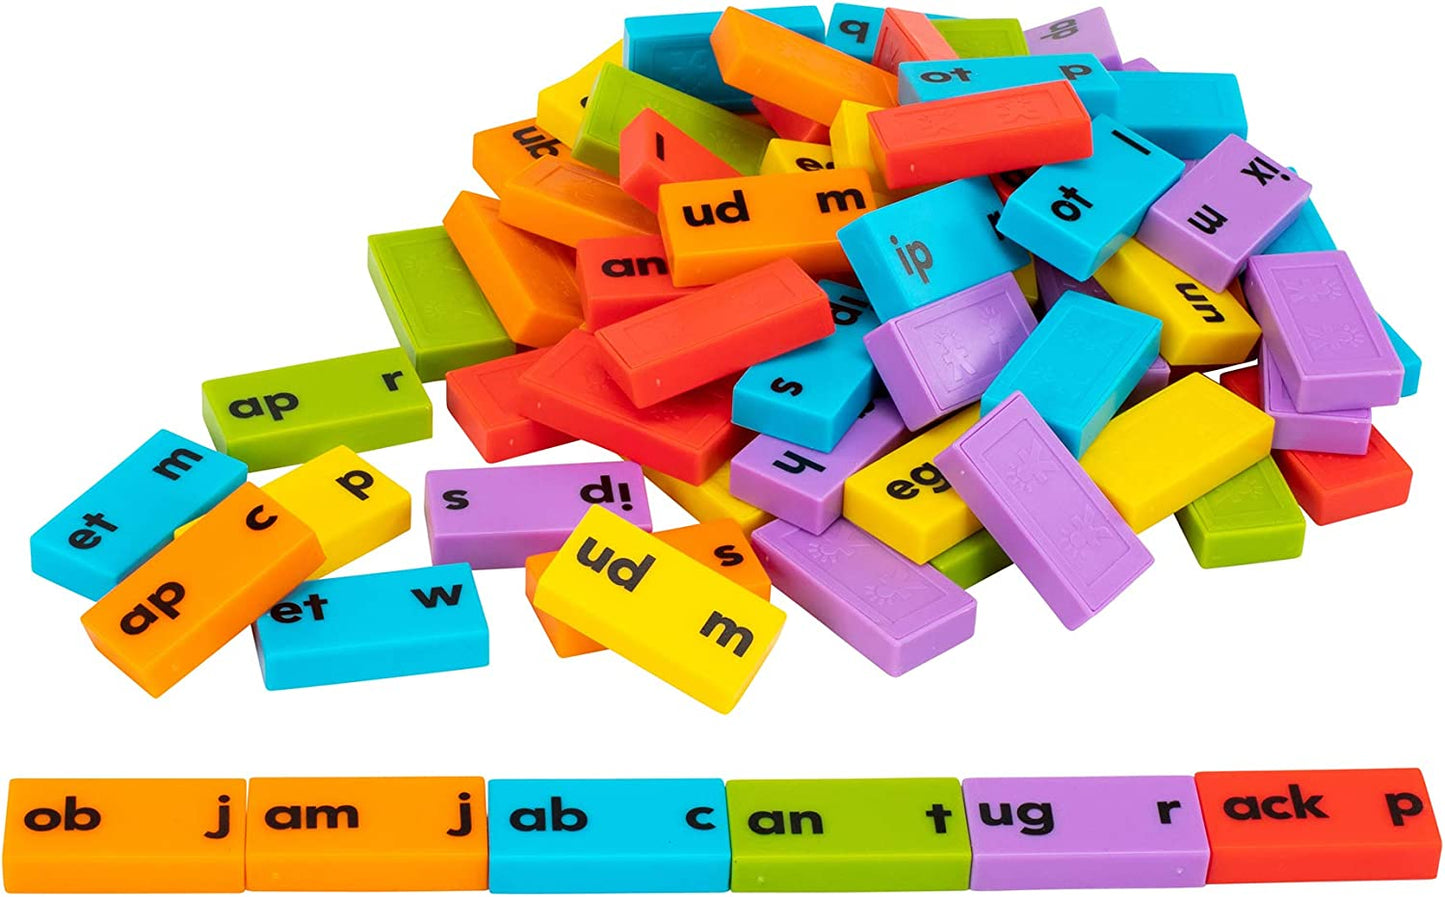 Phonics Dominoes – Short Vowels - Manipulative for Classroom & Home, Set of 84 Dominoes in 6 Colors, Ages 6+